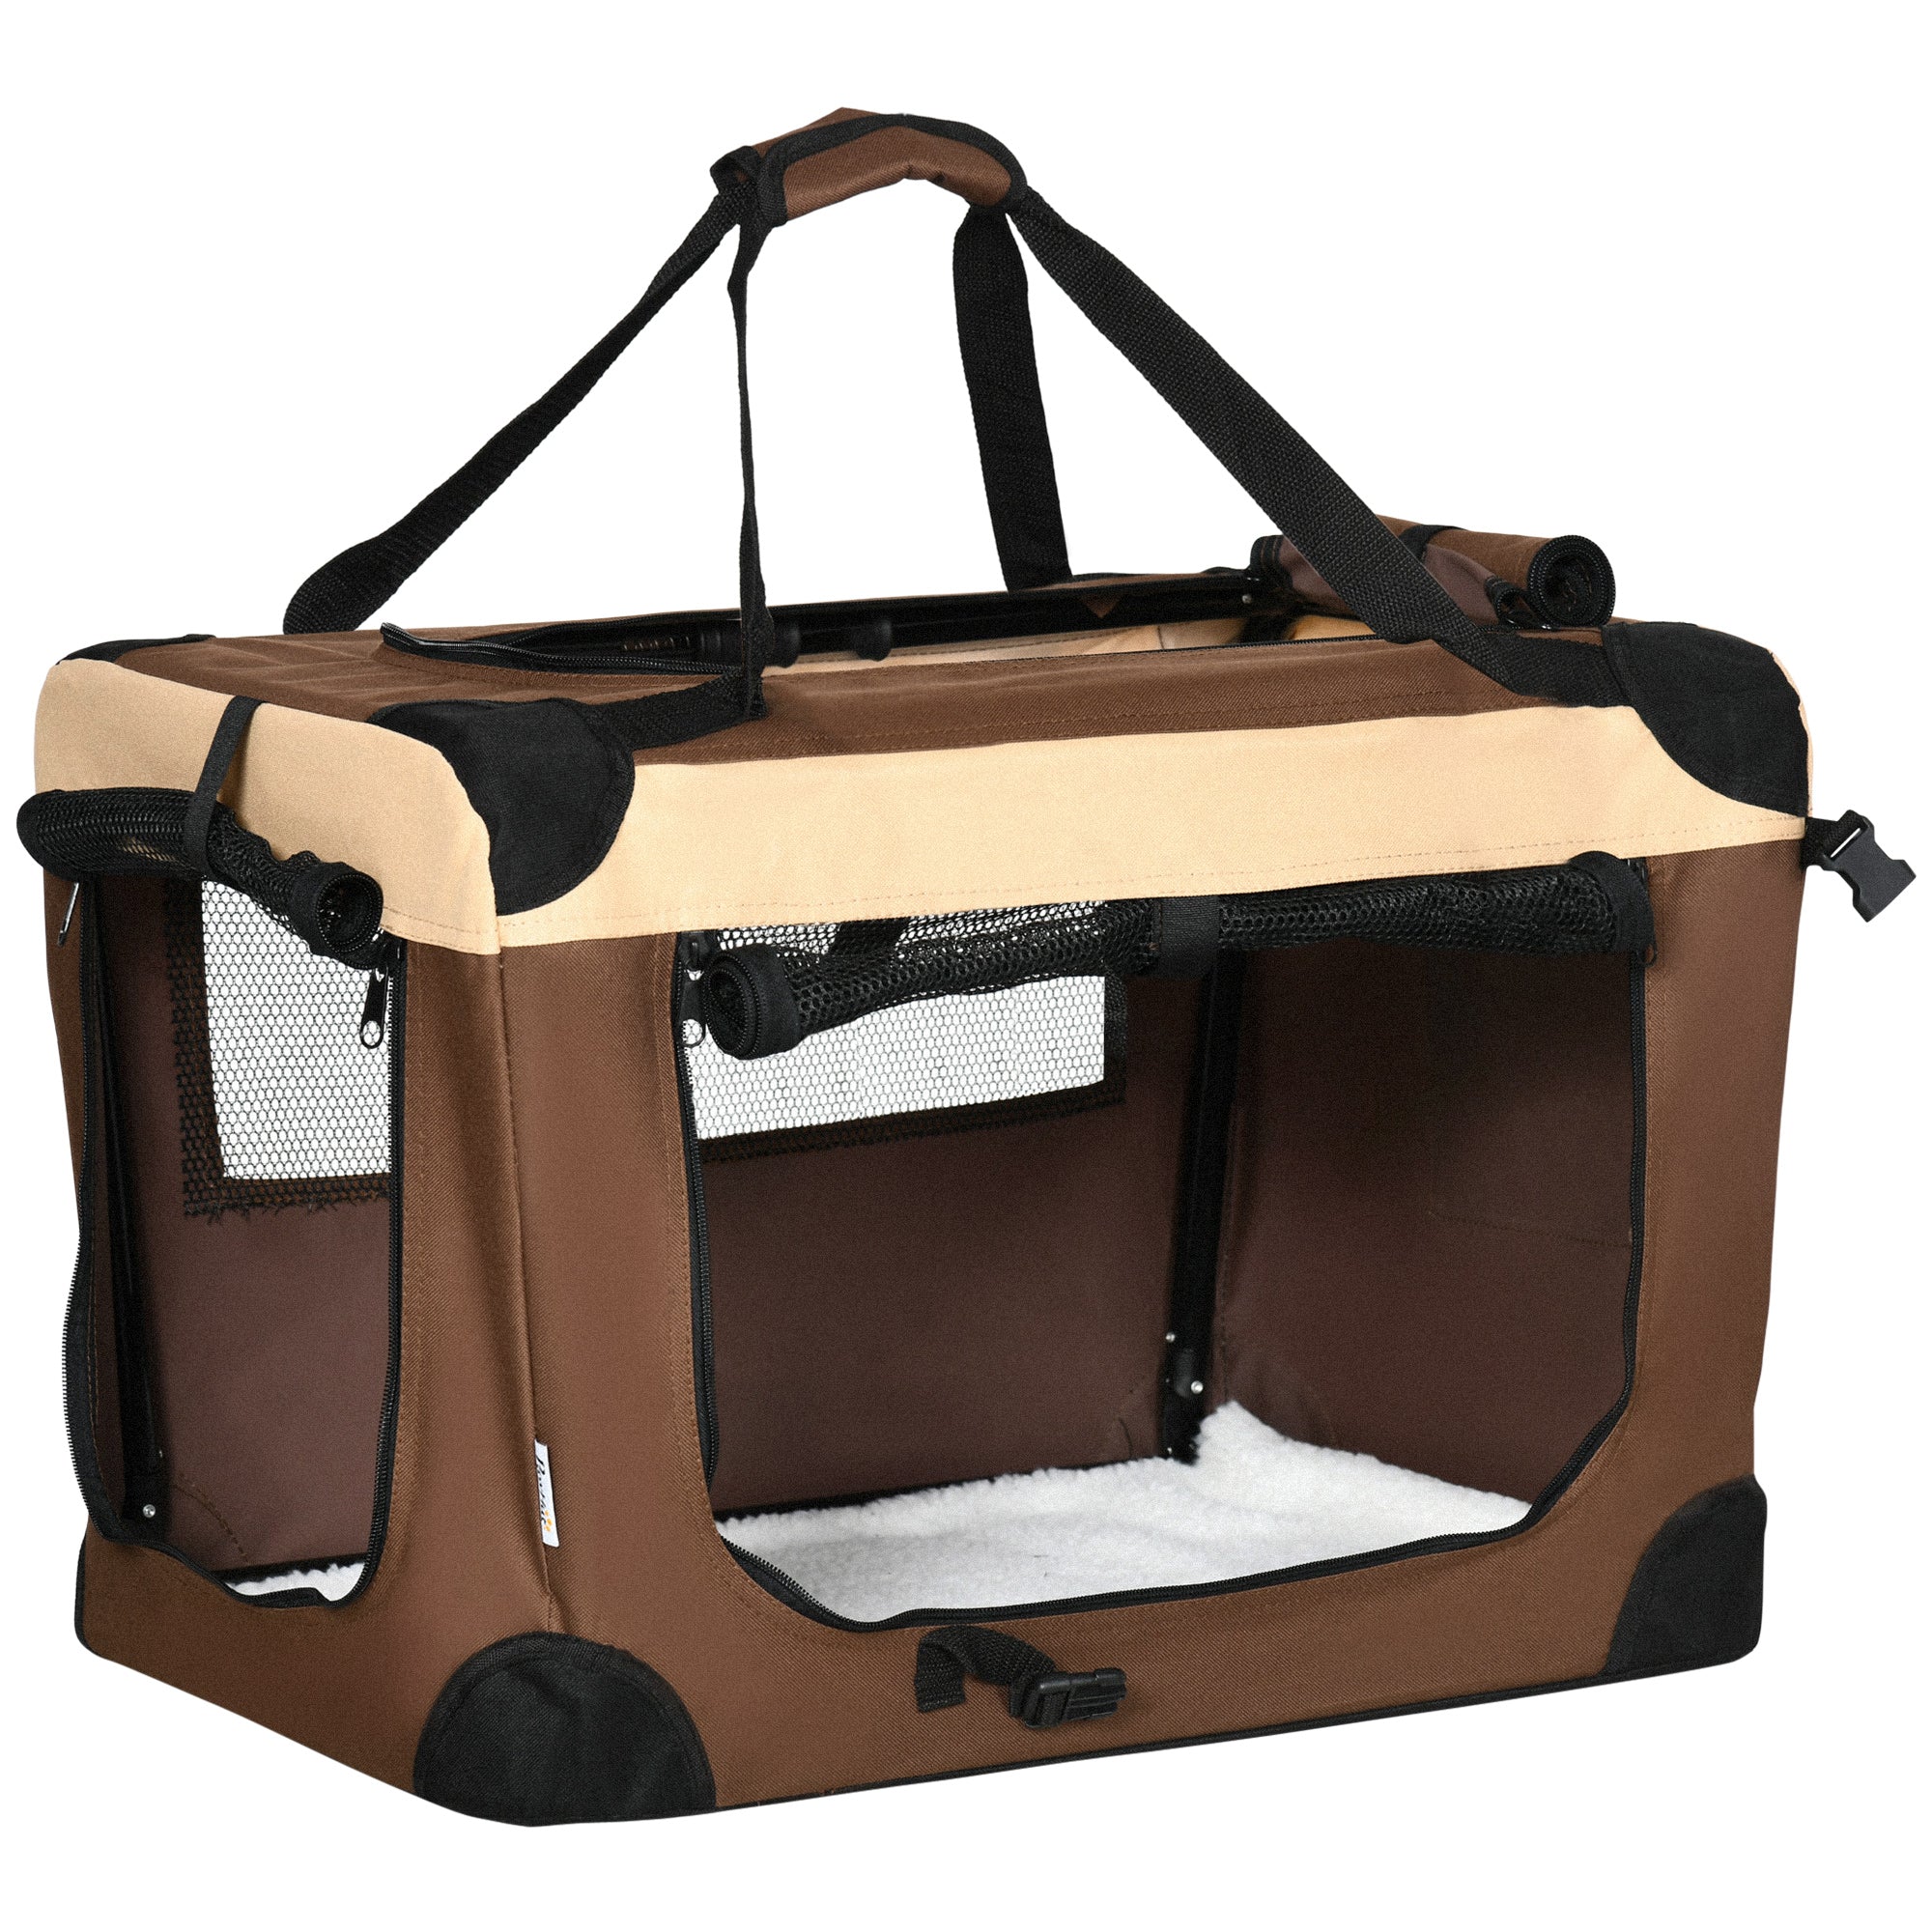 PawHut 60cm Foldable Pet Carrier Bag Soft Travel Dog Crate for Mini Dogs Brown  | TJ Hughes